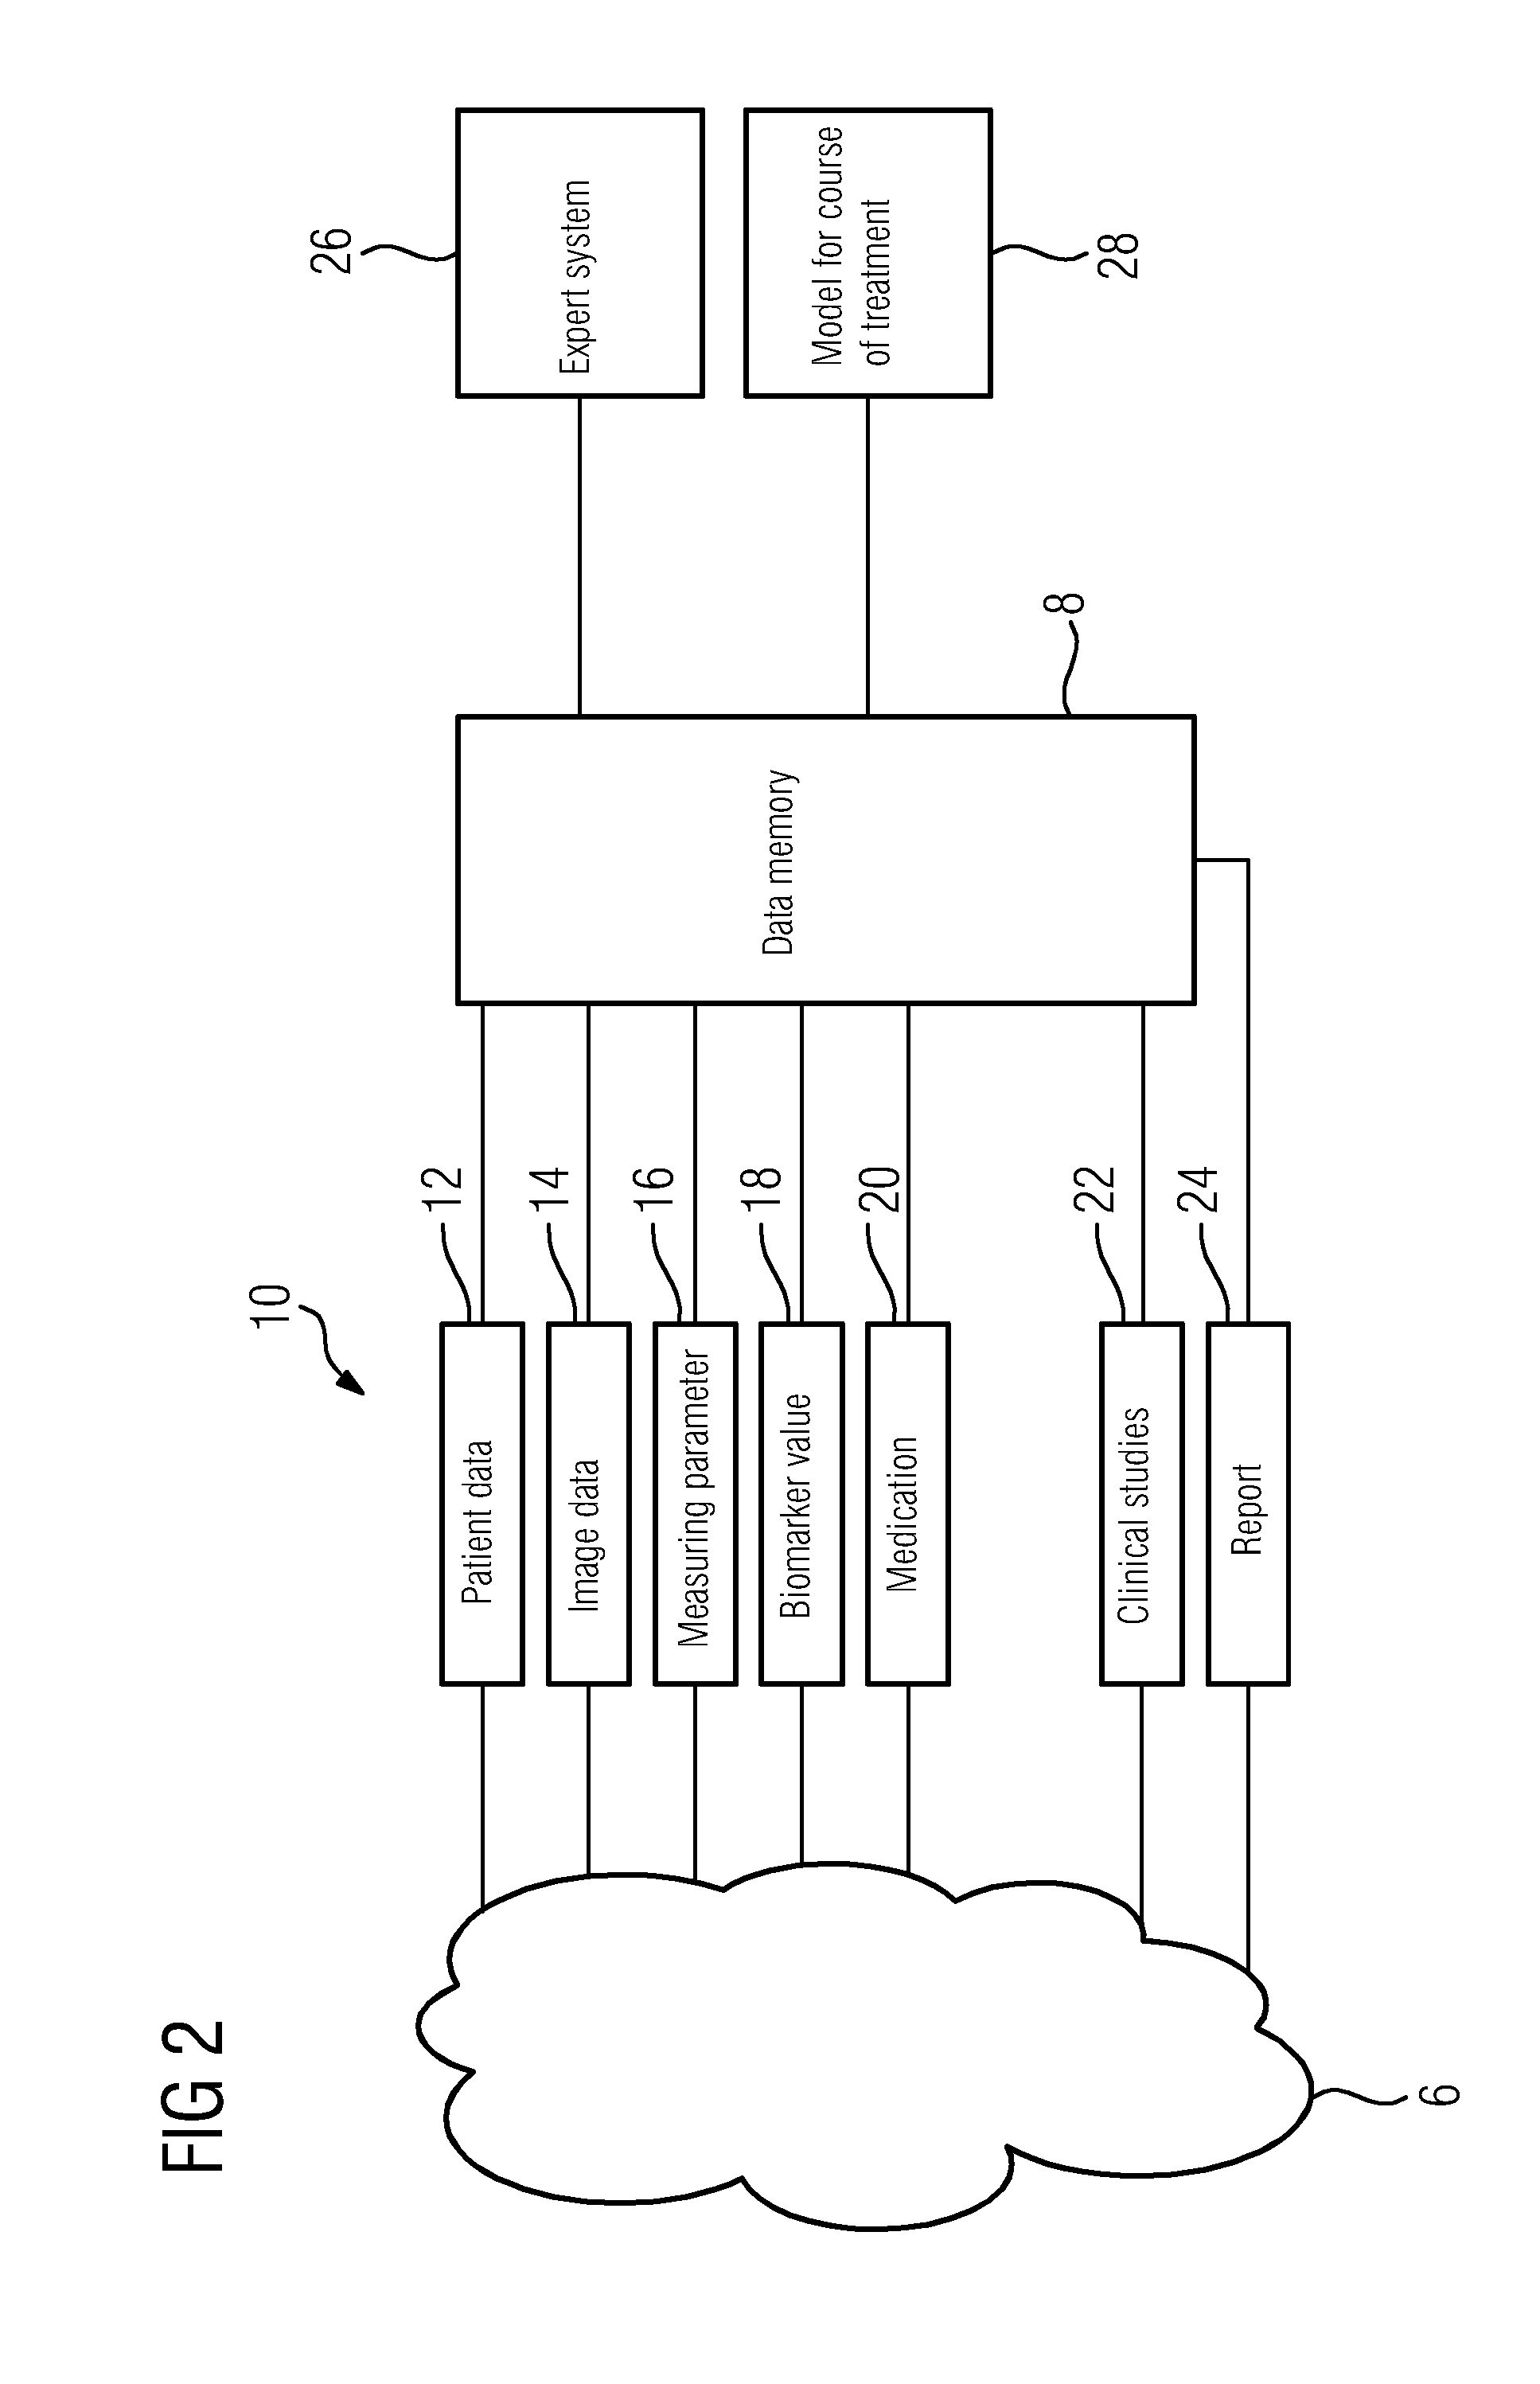 Method and device for determining a change over time in a biomarker in a region to be examined